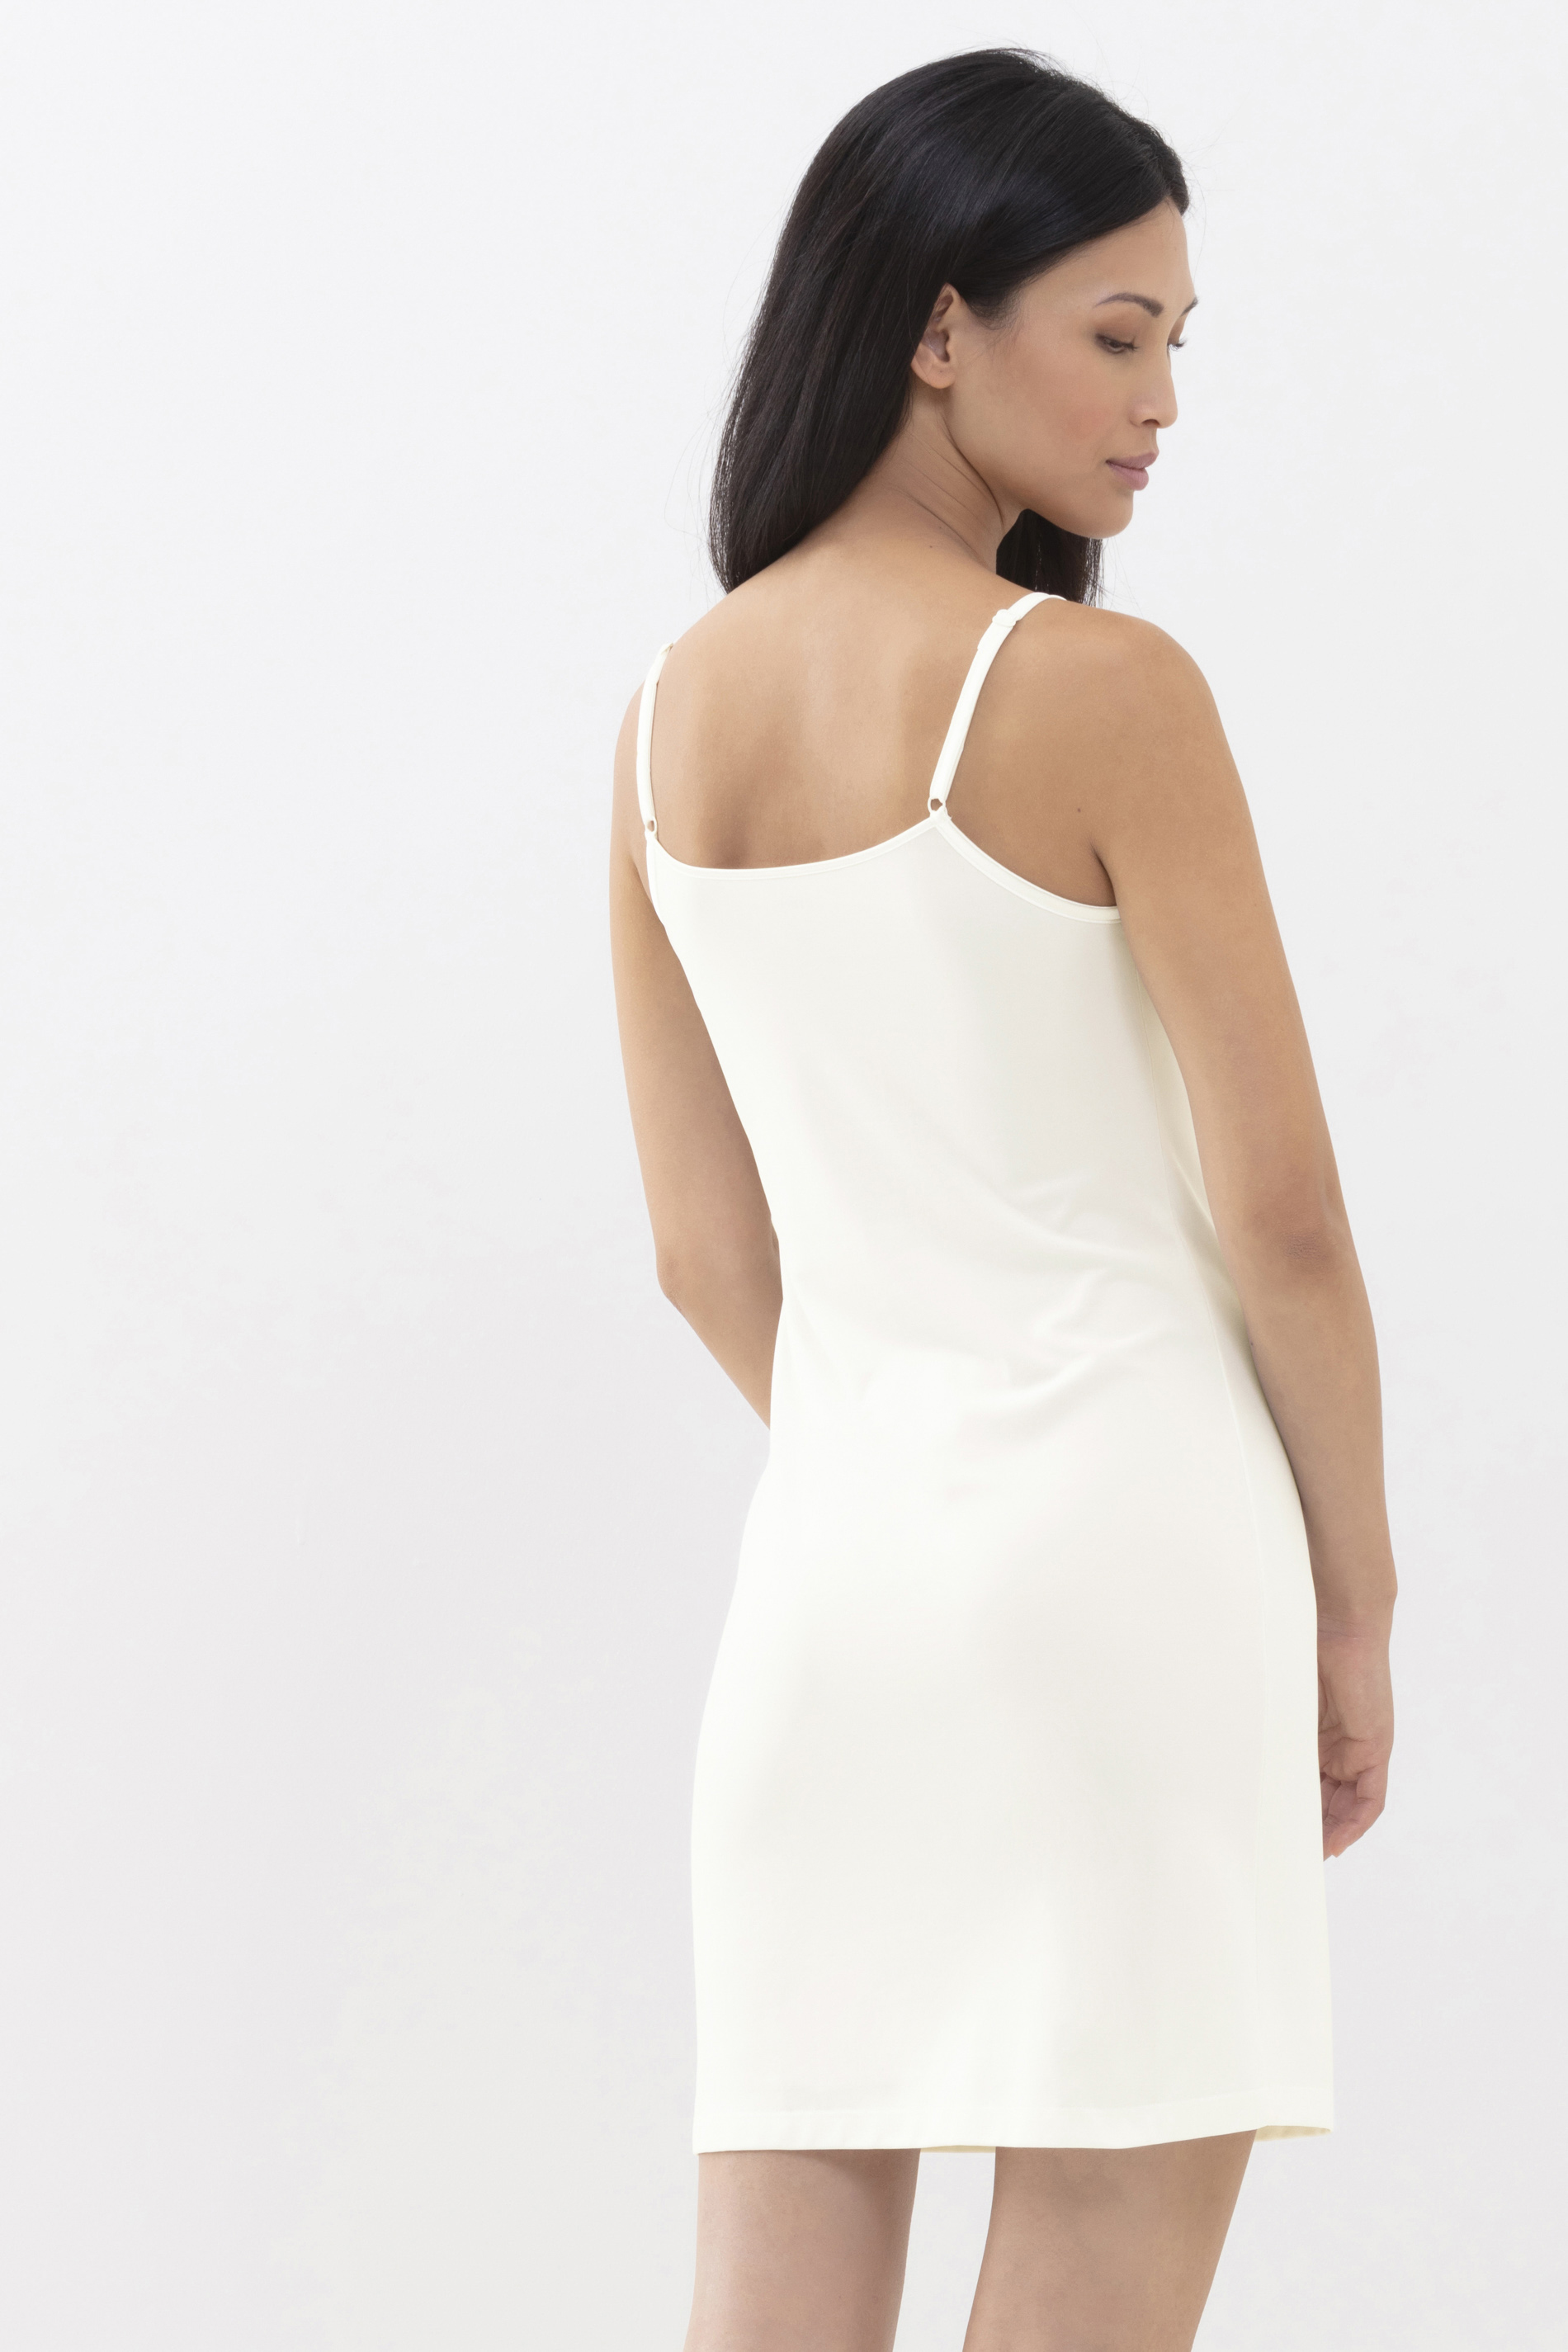 Body-Dress Champagner Serie Emotion Rear View | mey®